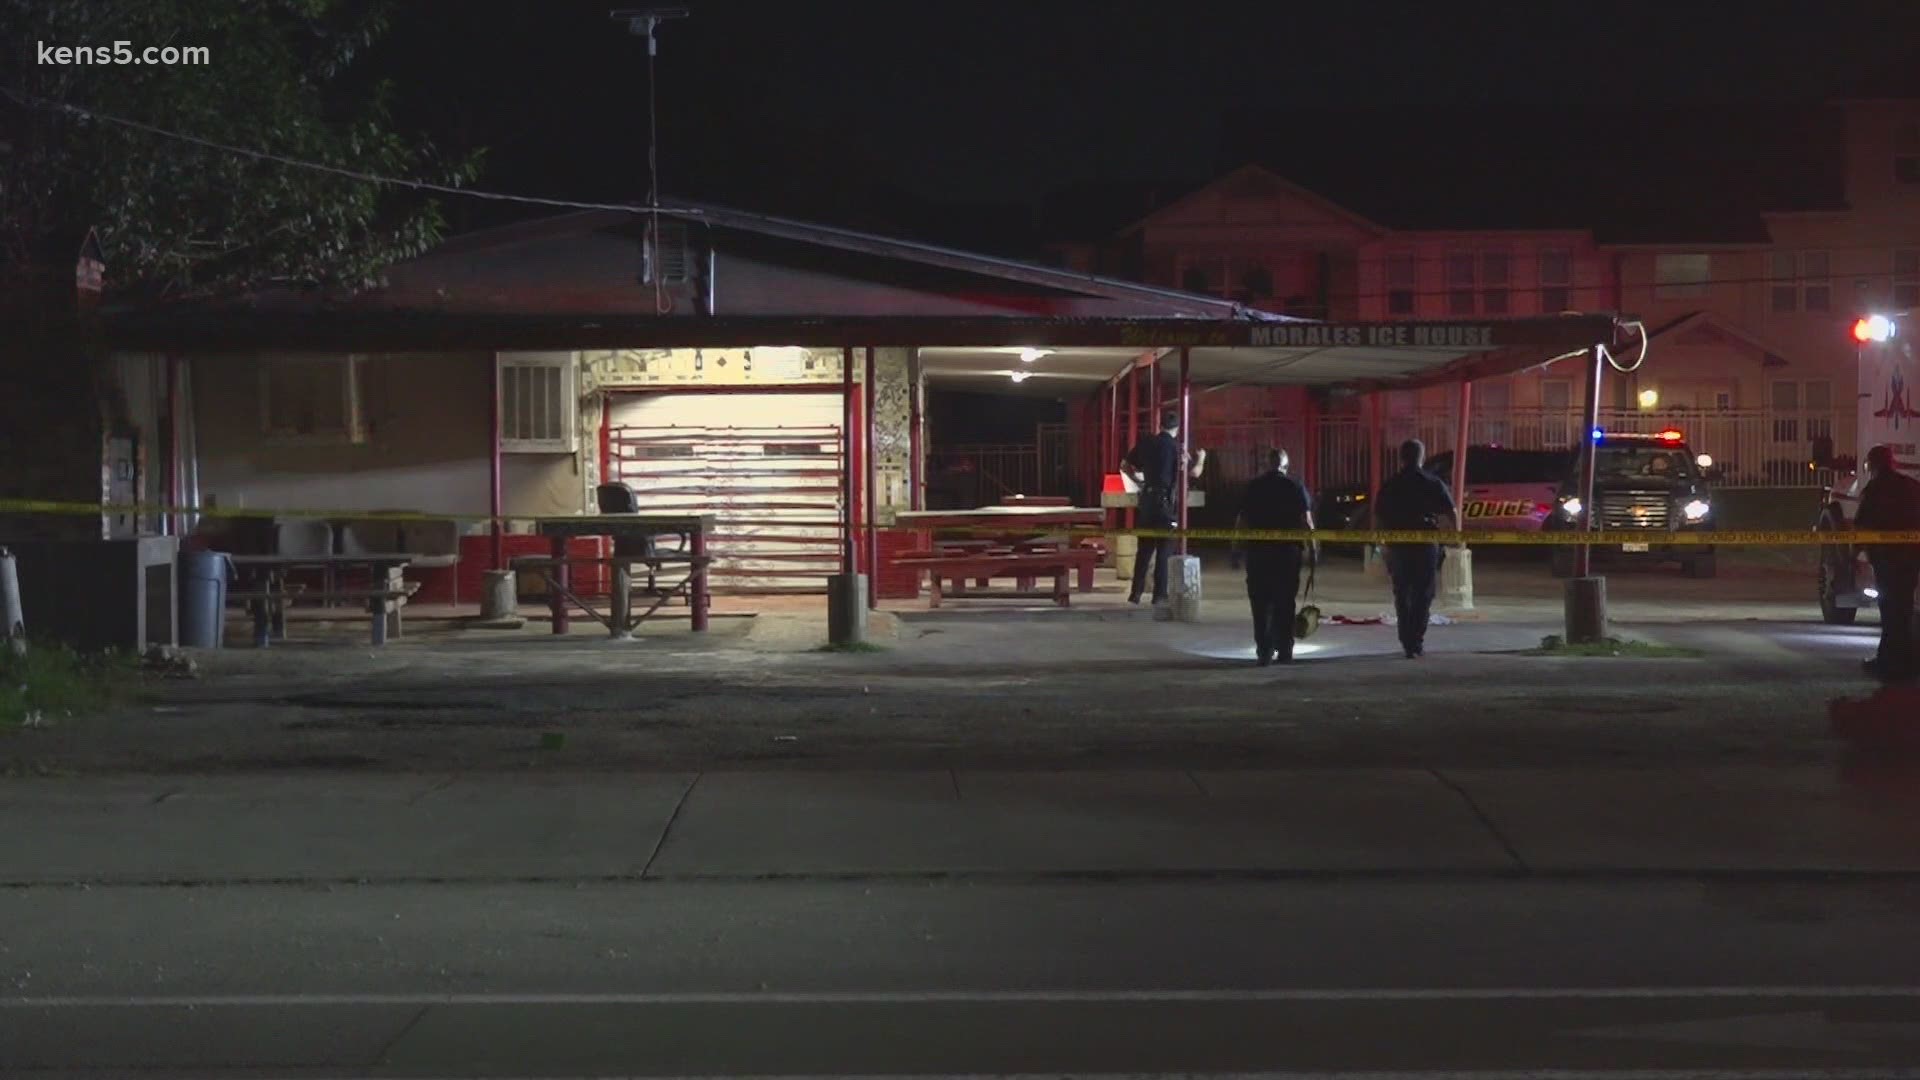 Police are looking for the person who shot a man outside an ice house near downtown San Antonio Friday morning.